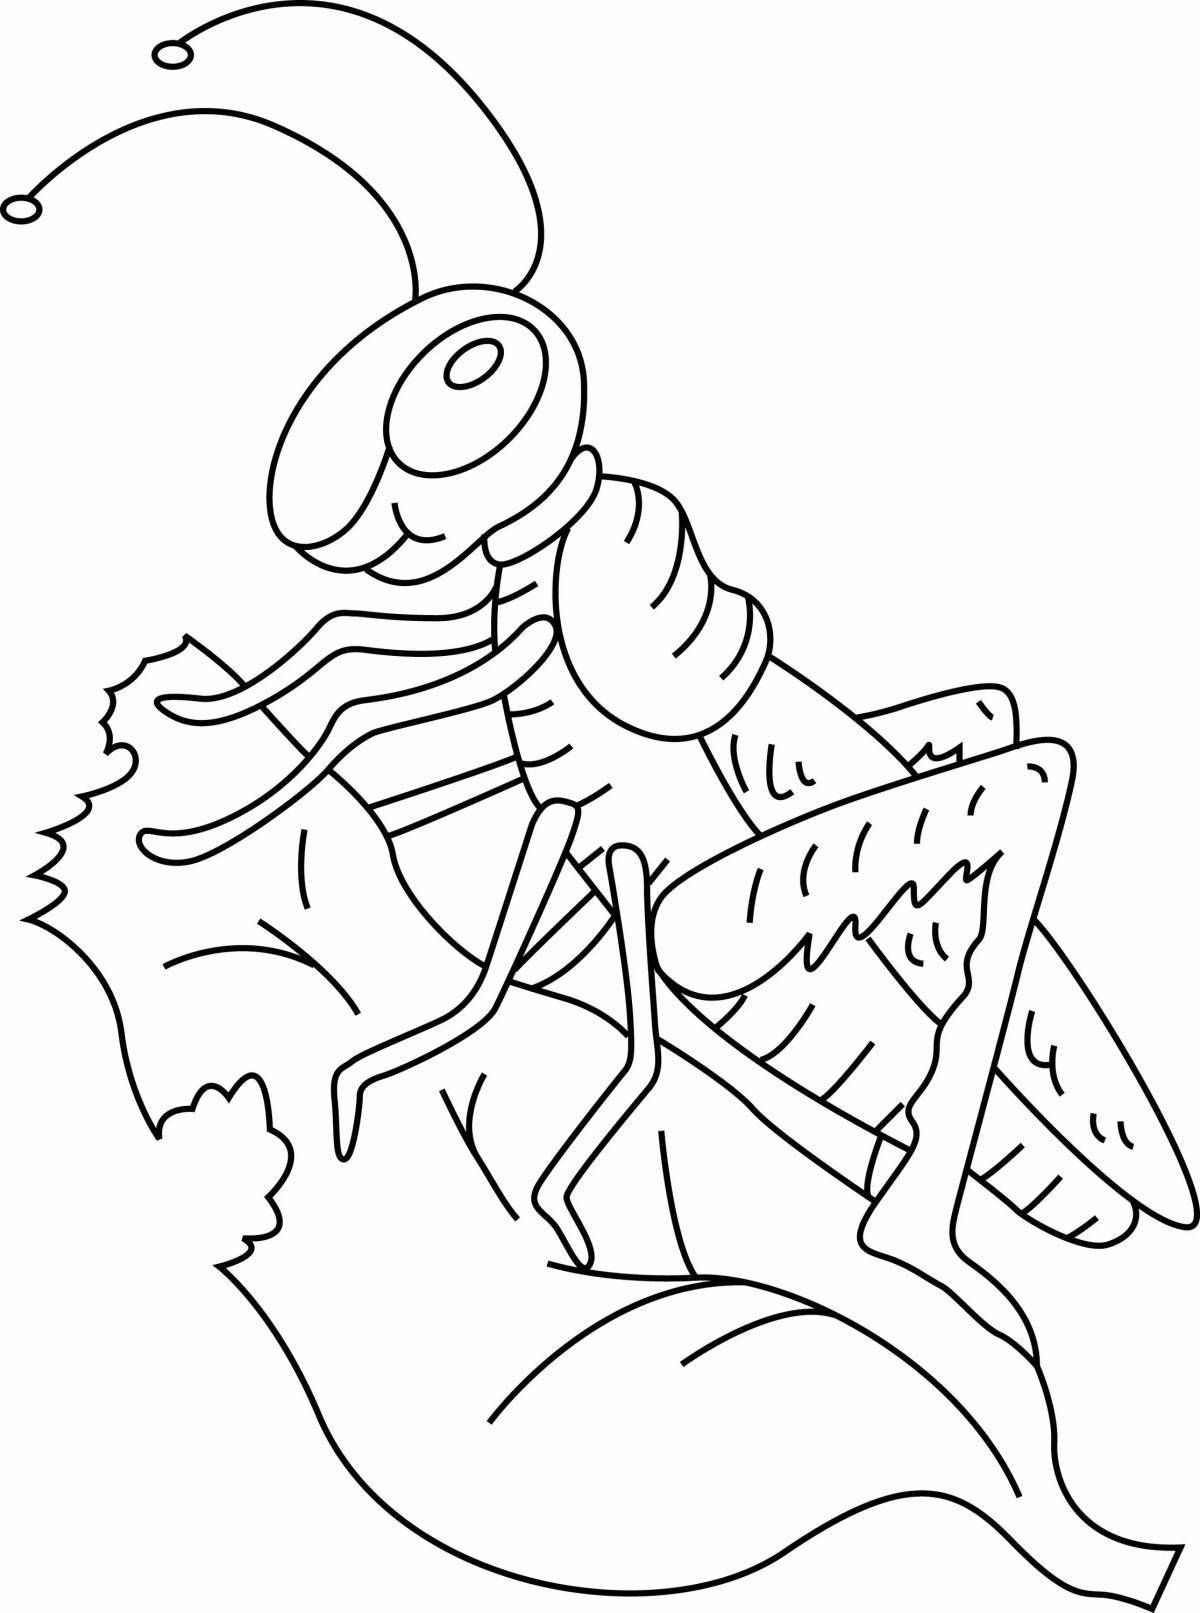 Live cricket coloring page